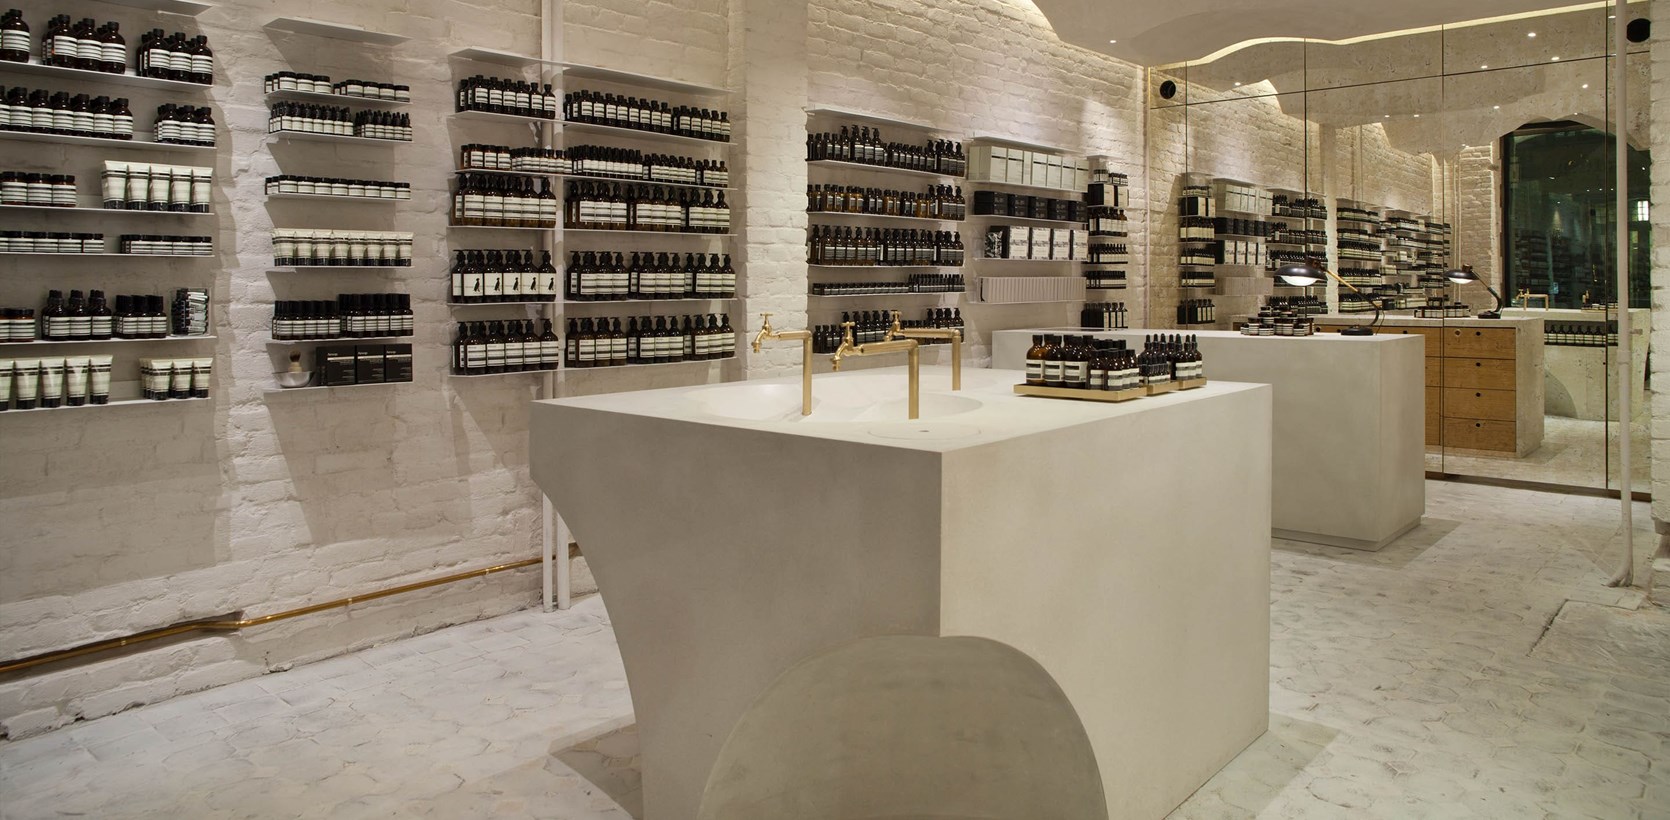 TAKE A LOOK INSIDE THE STORE: 
AESOP